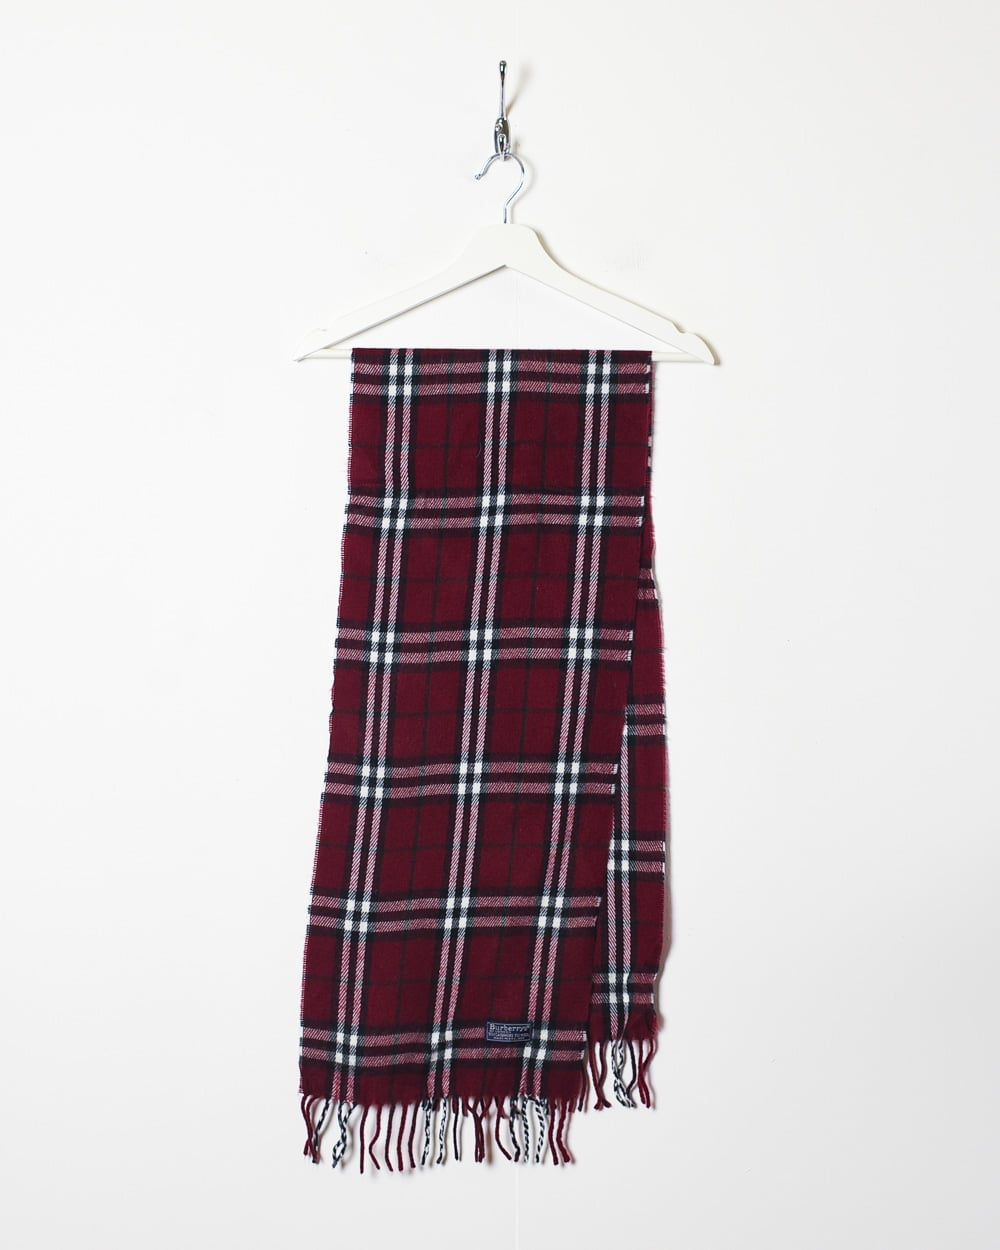 Maroon Burberry Cashmere Wool Scarf